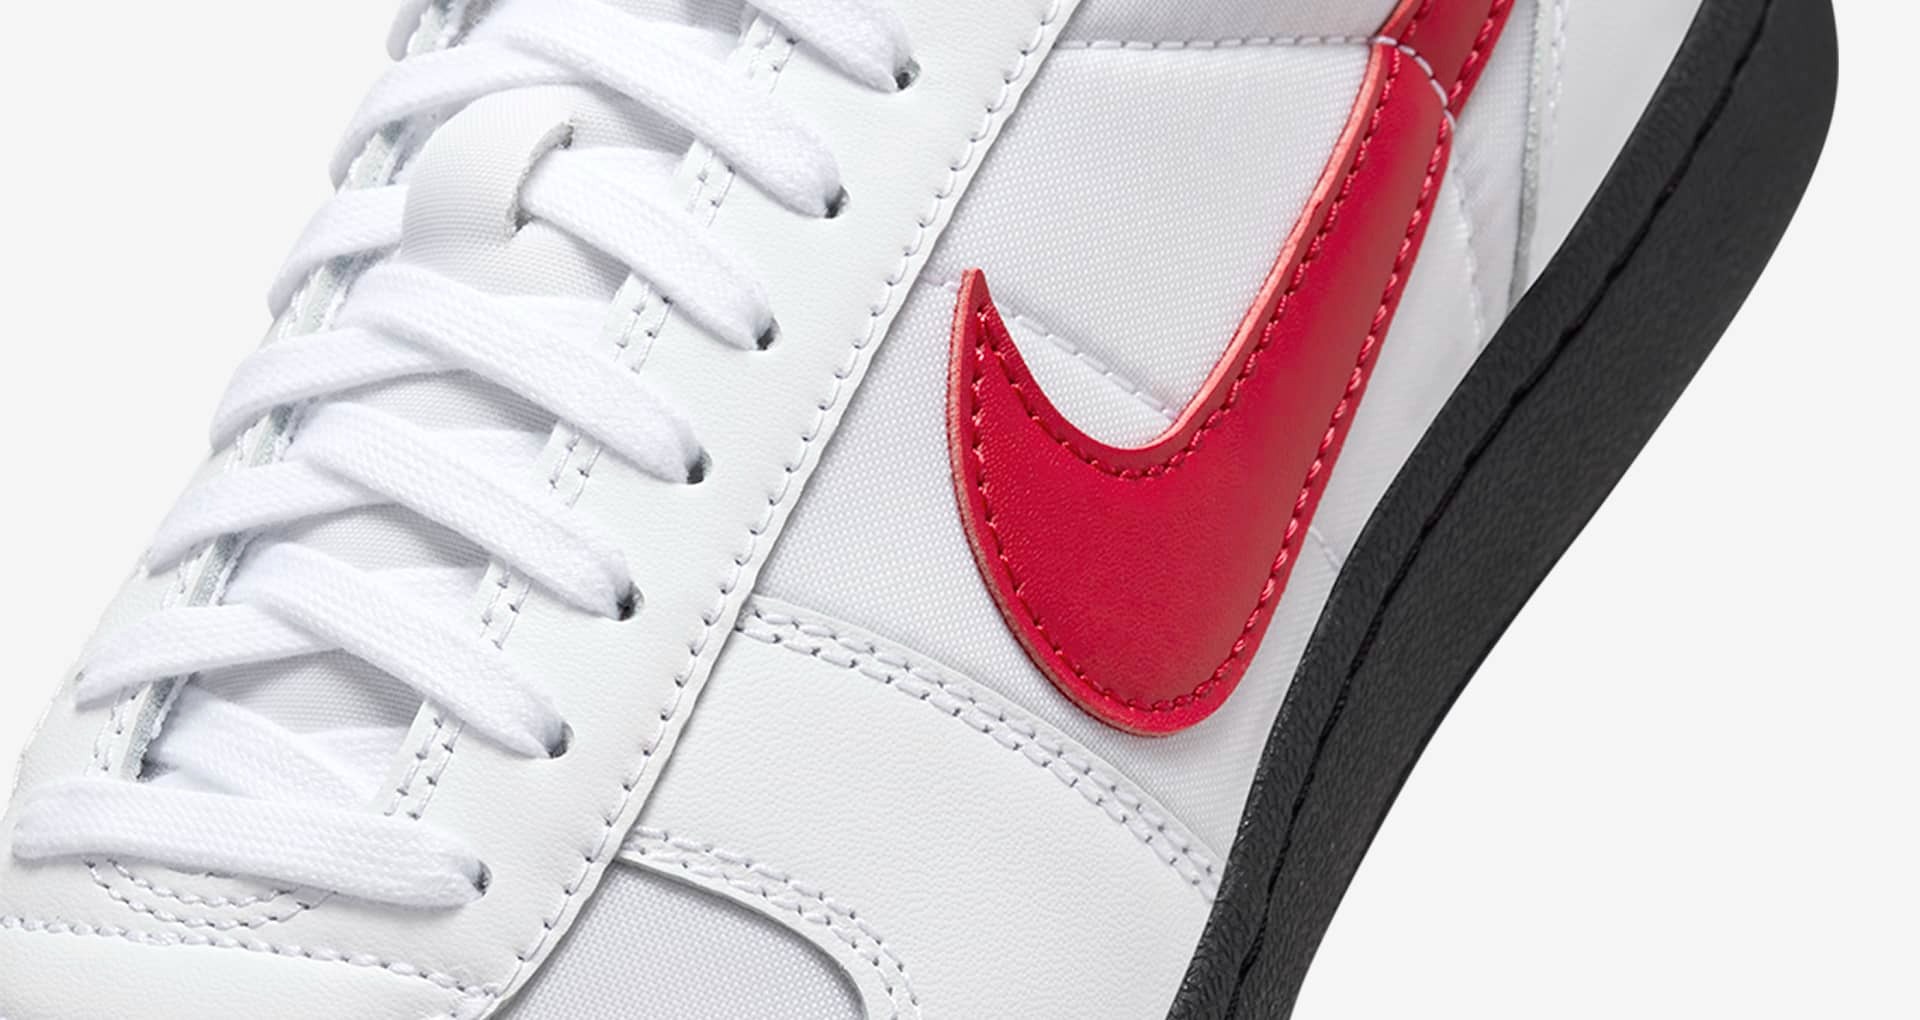 Nike Field General '82 White and Varsity Red